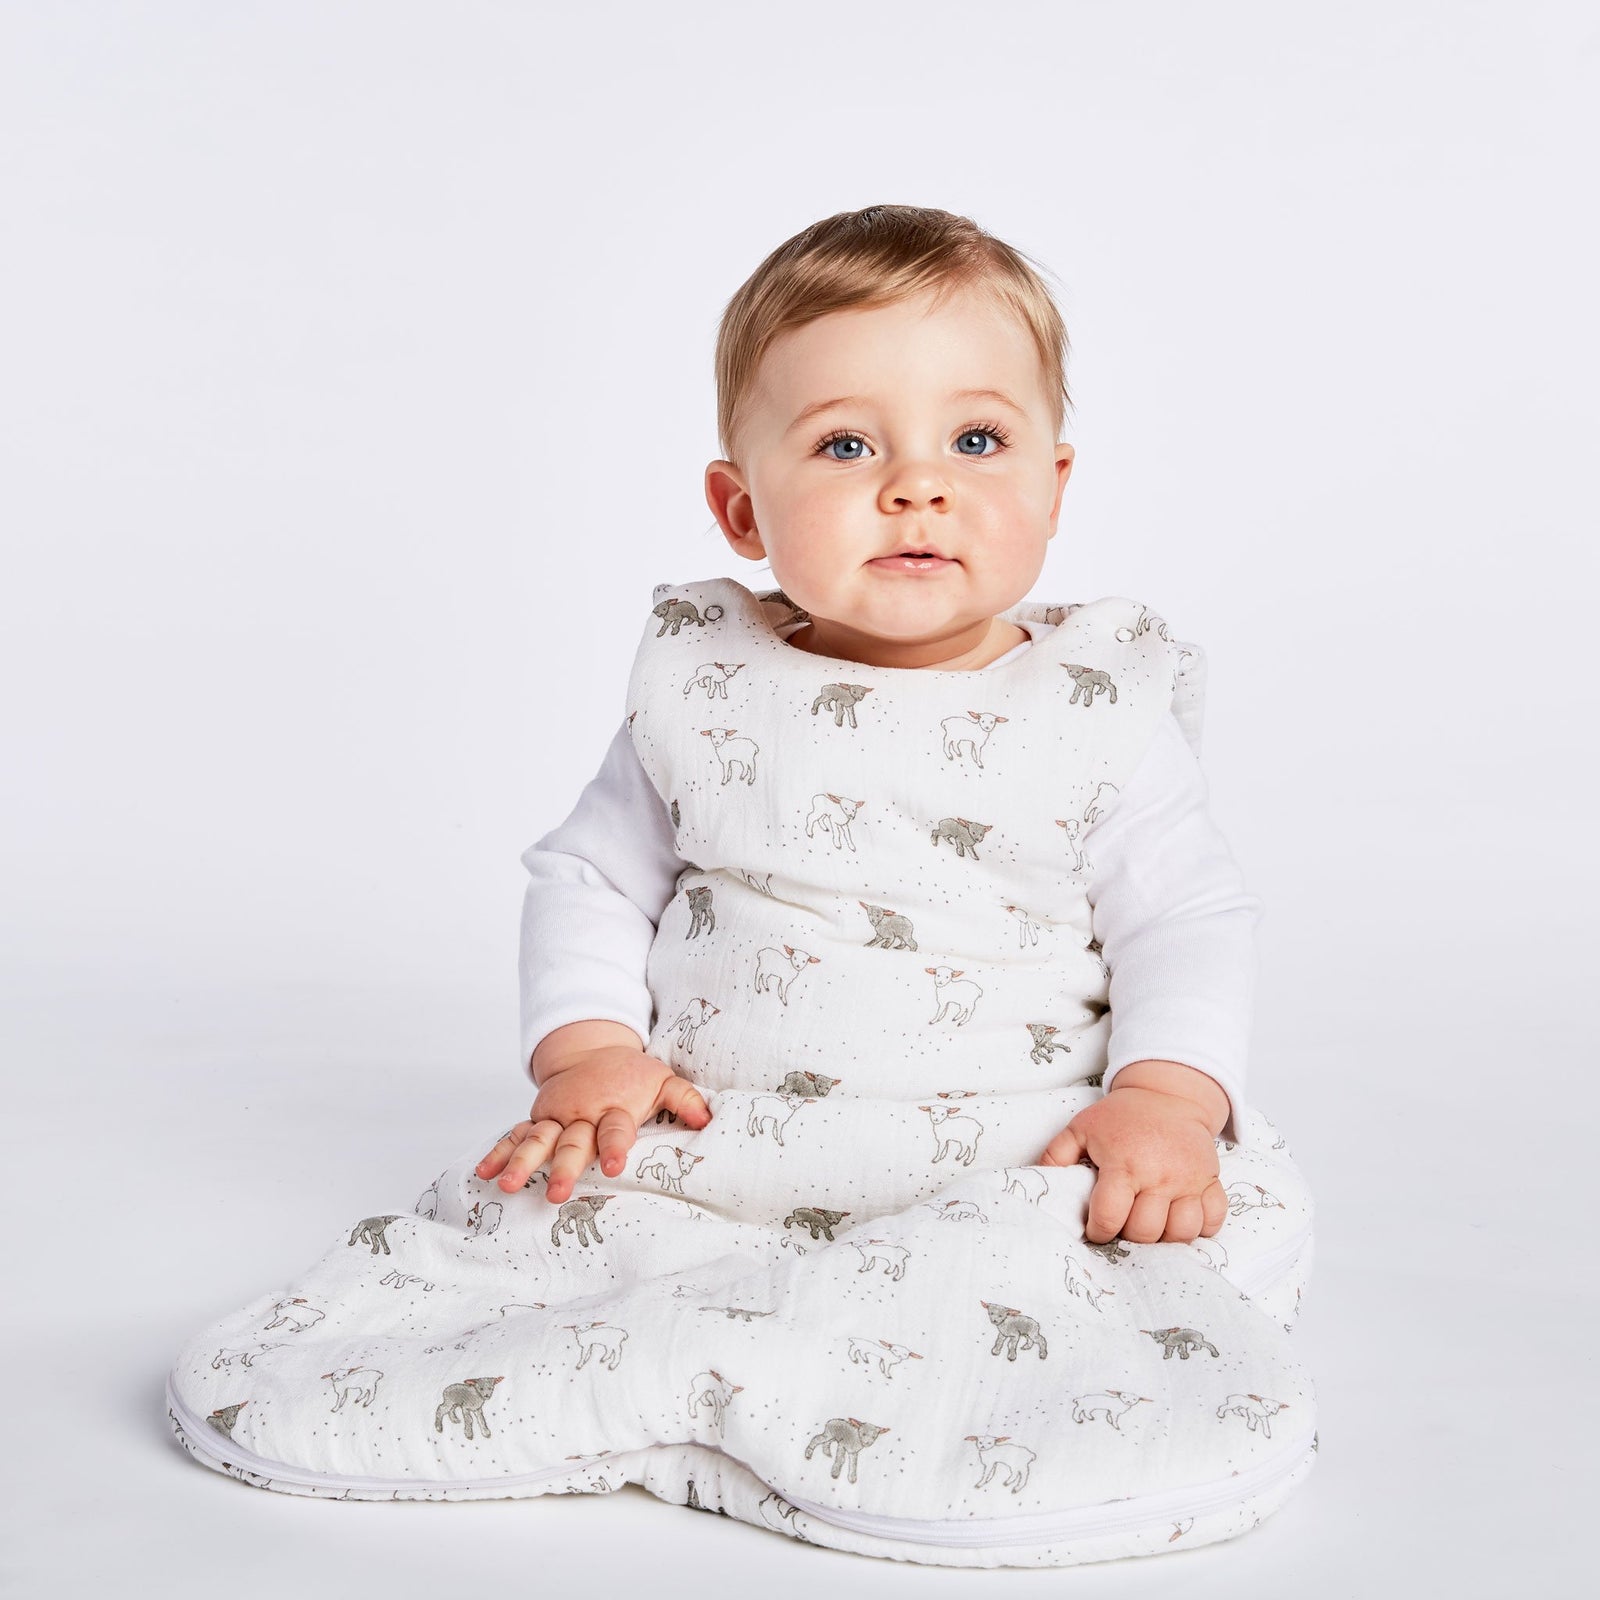 Baby wearing Pehr Little Lamb 1.0 TOG Sleep Bag on white background. 100% organic muslin cotton. White with grey and white little lamb print.